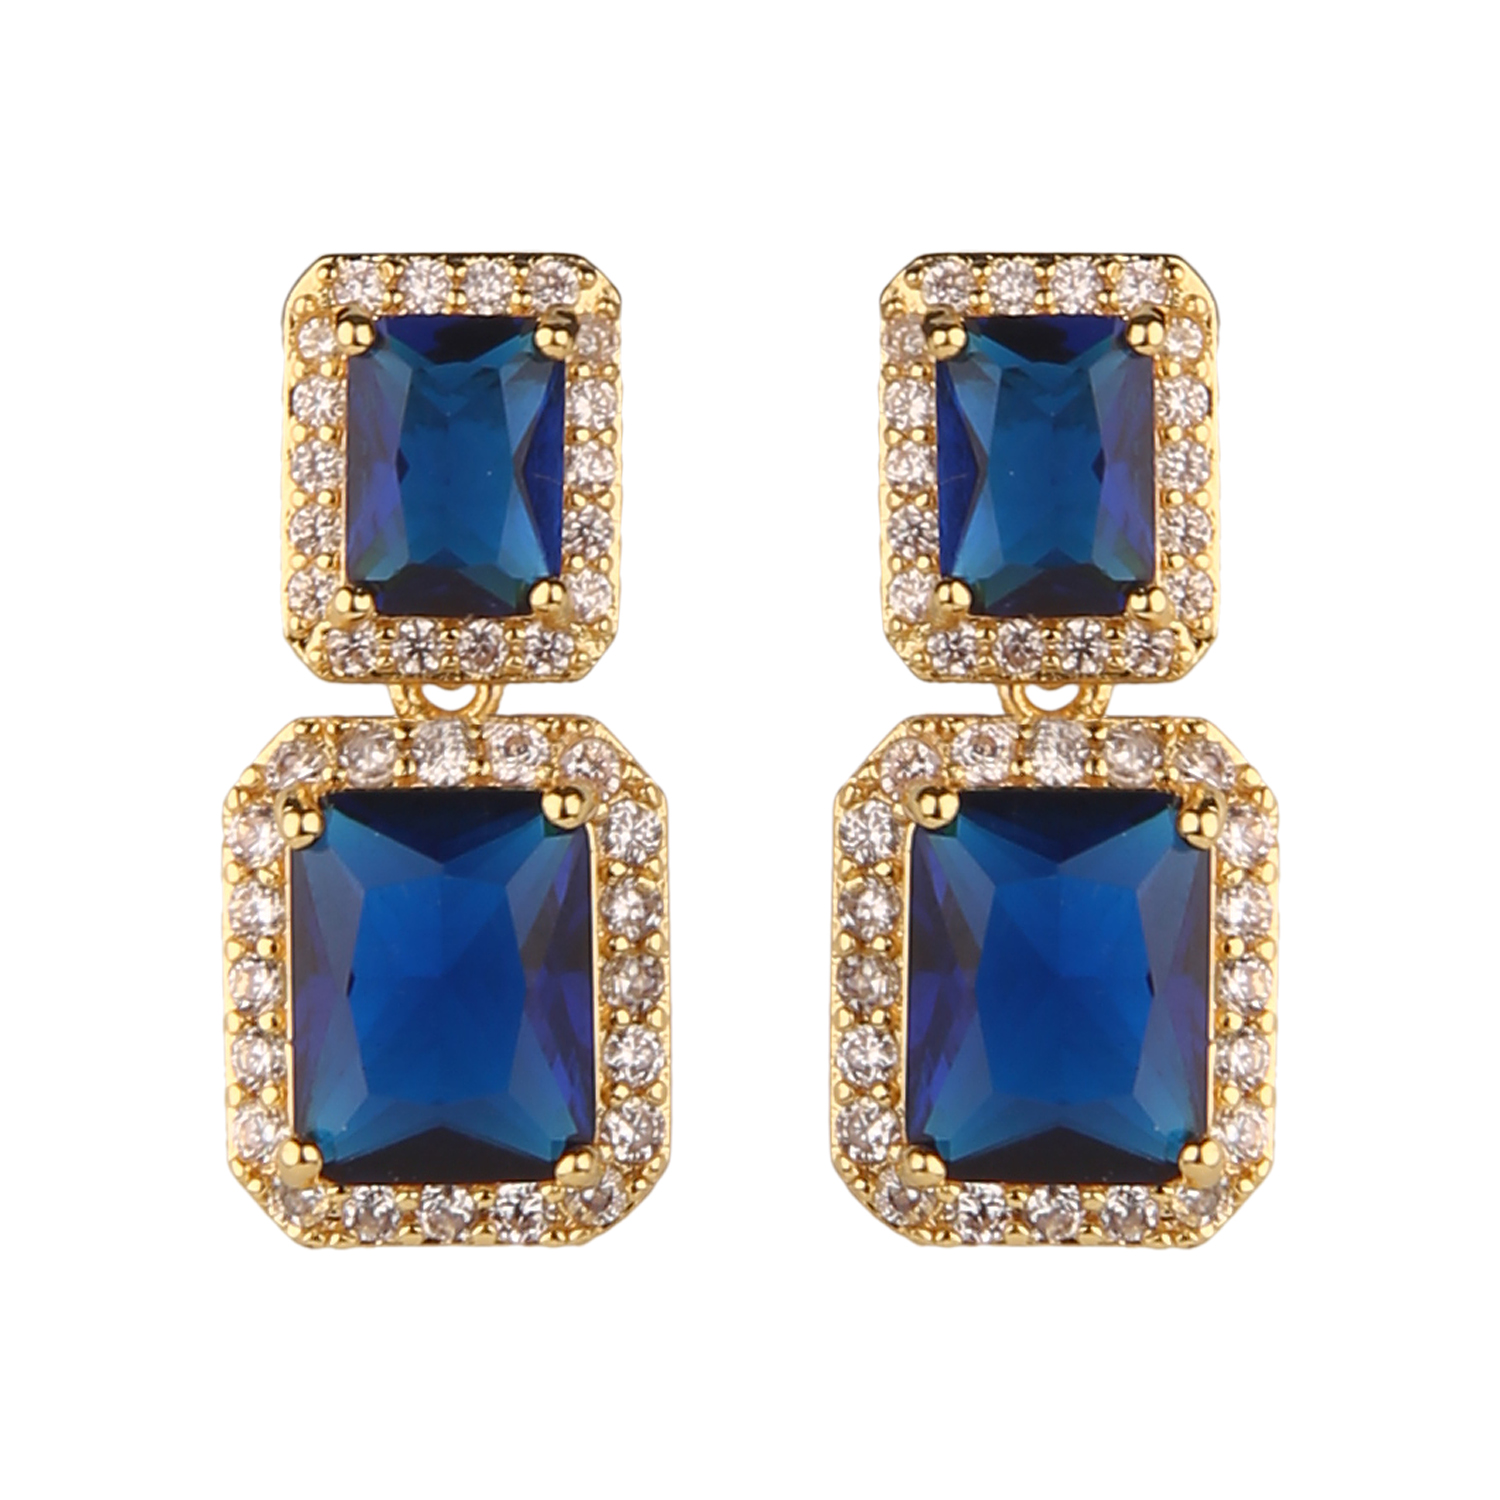 Buy Shraddha Jewellers Alloy Gold Plated Blue Color Stone CZ Earrings ...